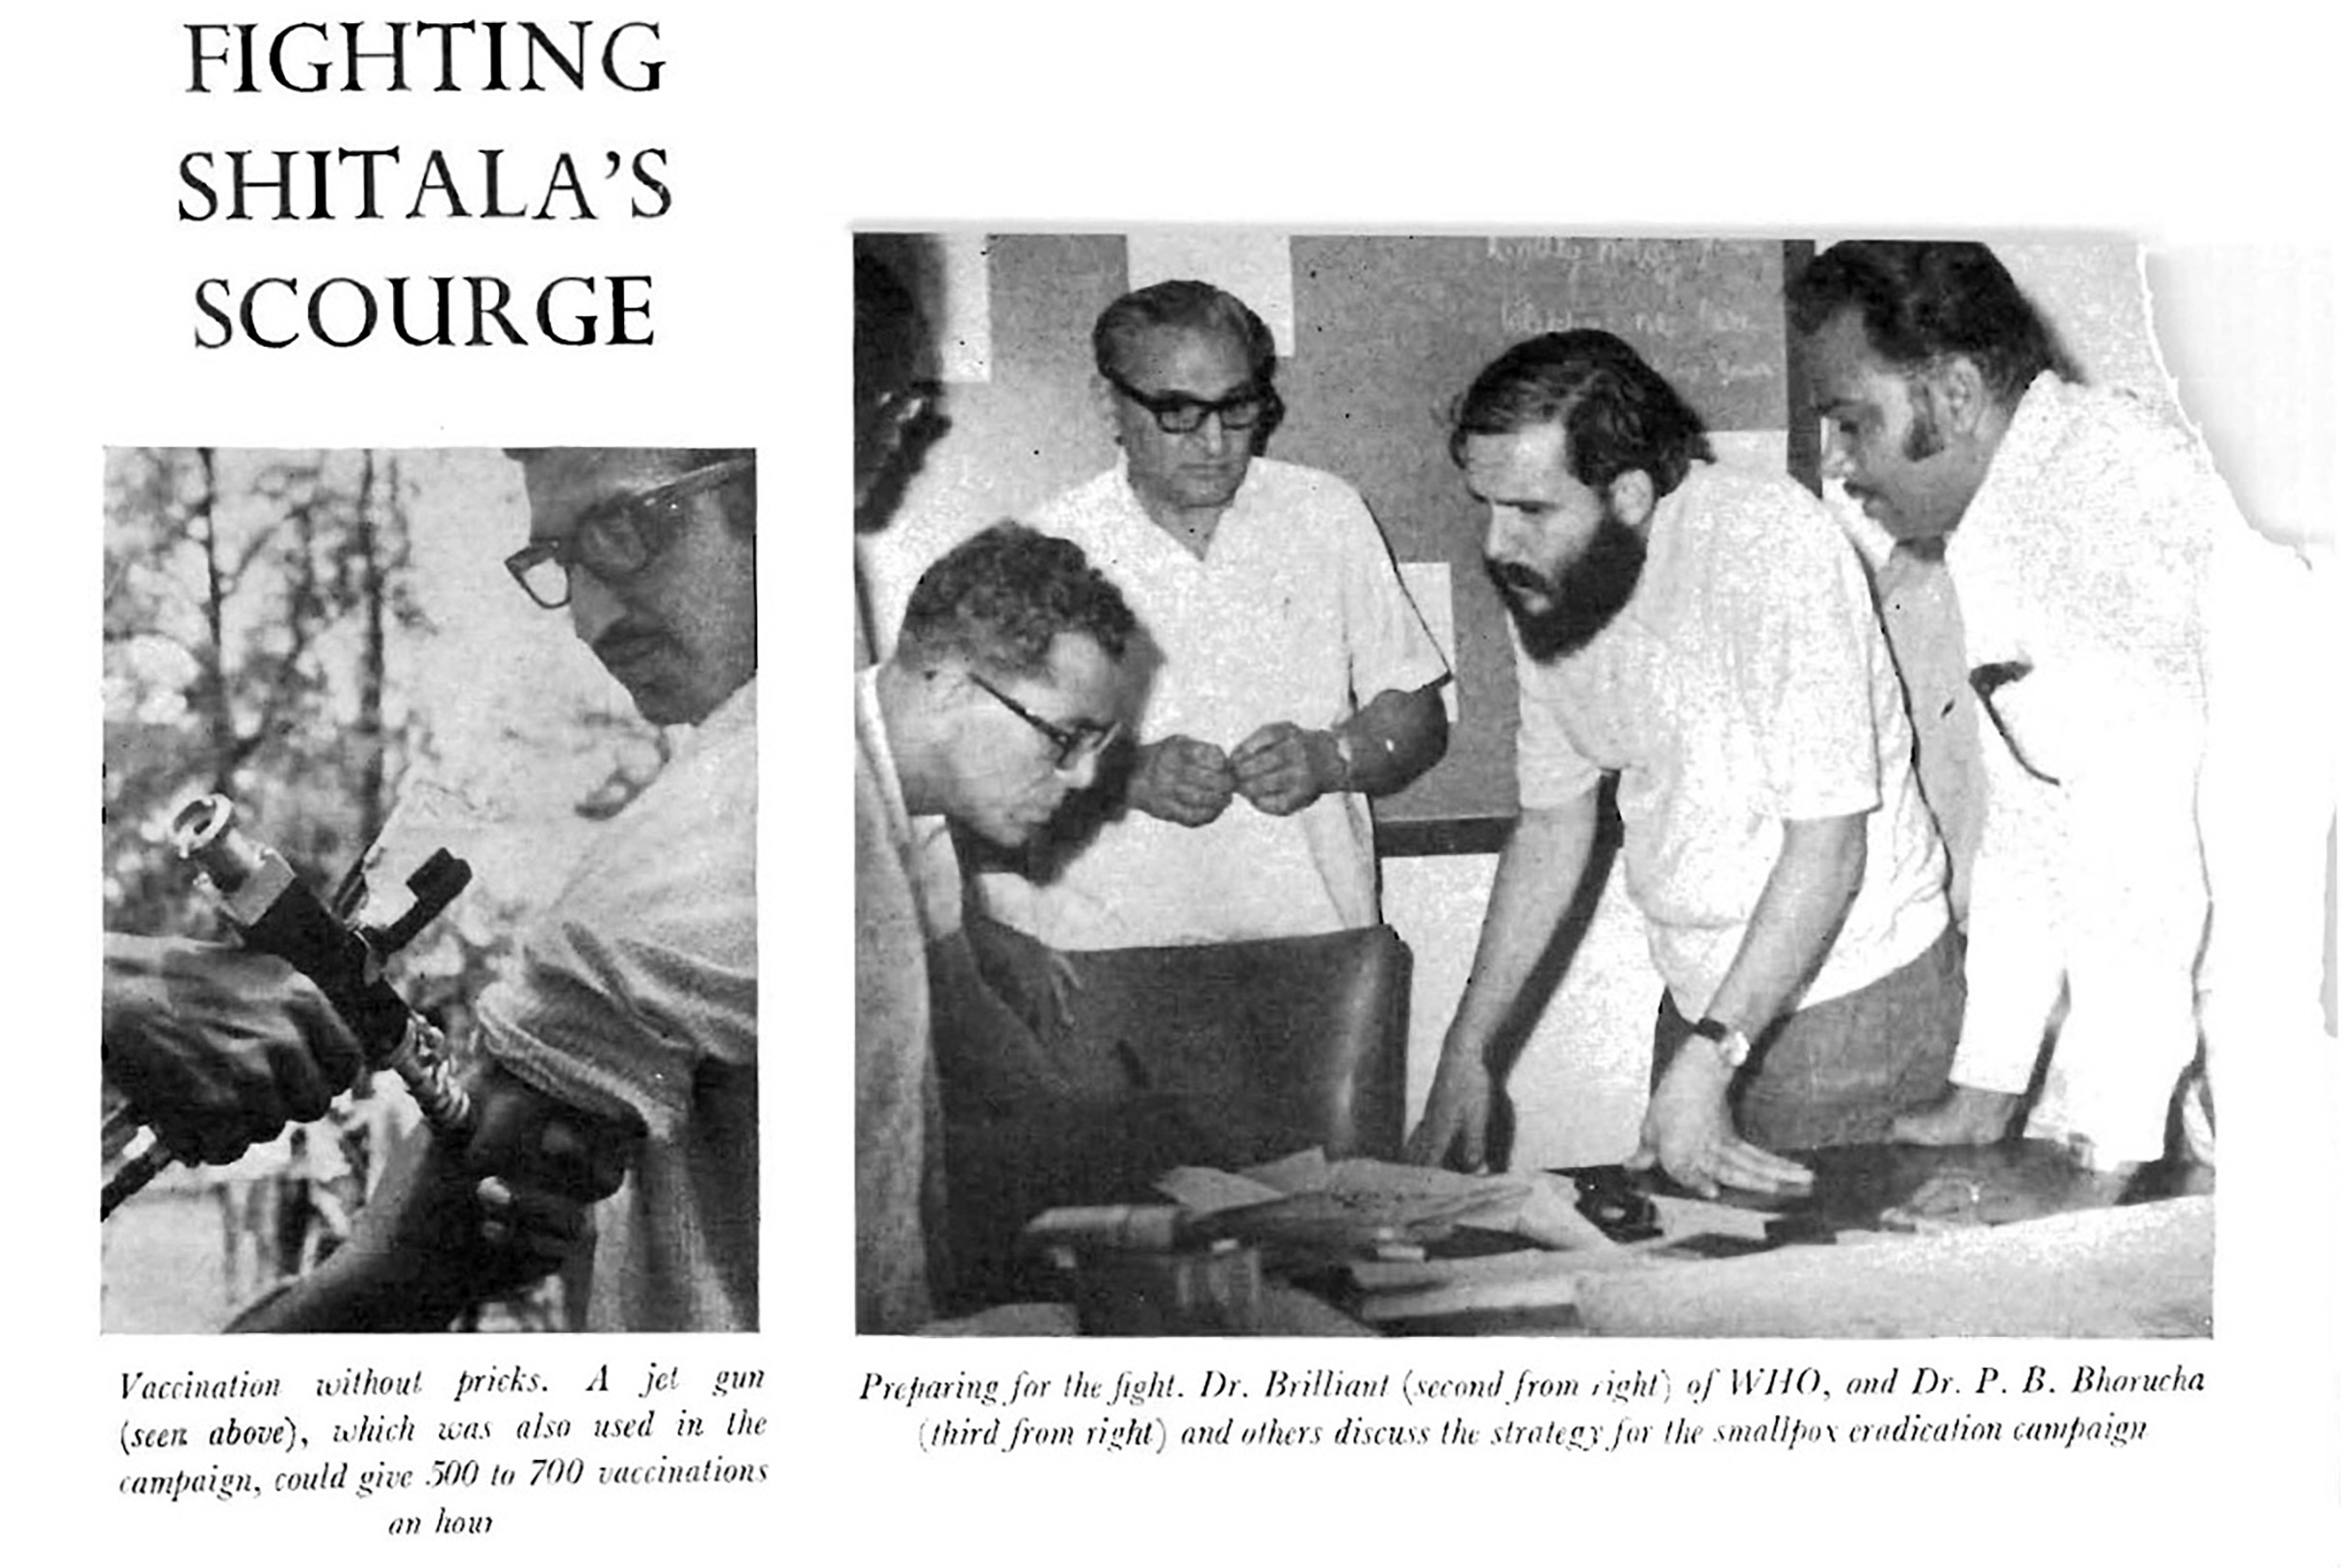 A copy of a publication from 1974 called “TISCO News.” The left image shows a man being vaccinated with a jet injector, and its caption reads: “Vaccination without pricks. A jet gun (seen above), which was also used in the campaign, could give 500 to 700 vaccinations an hour.” The right image shows American epidemiologist Larry Brilliant among others at a table, and its caption reads: “Preparing for the fight, Dr. Brilliant (second from right) of WHO, and Dr. P.B. Bhorucha (third from right) and others discuss the strategy for the smallpox eradication campaign.”